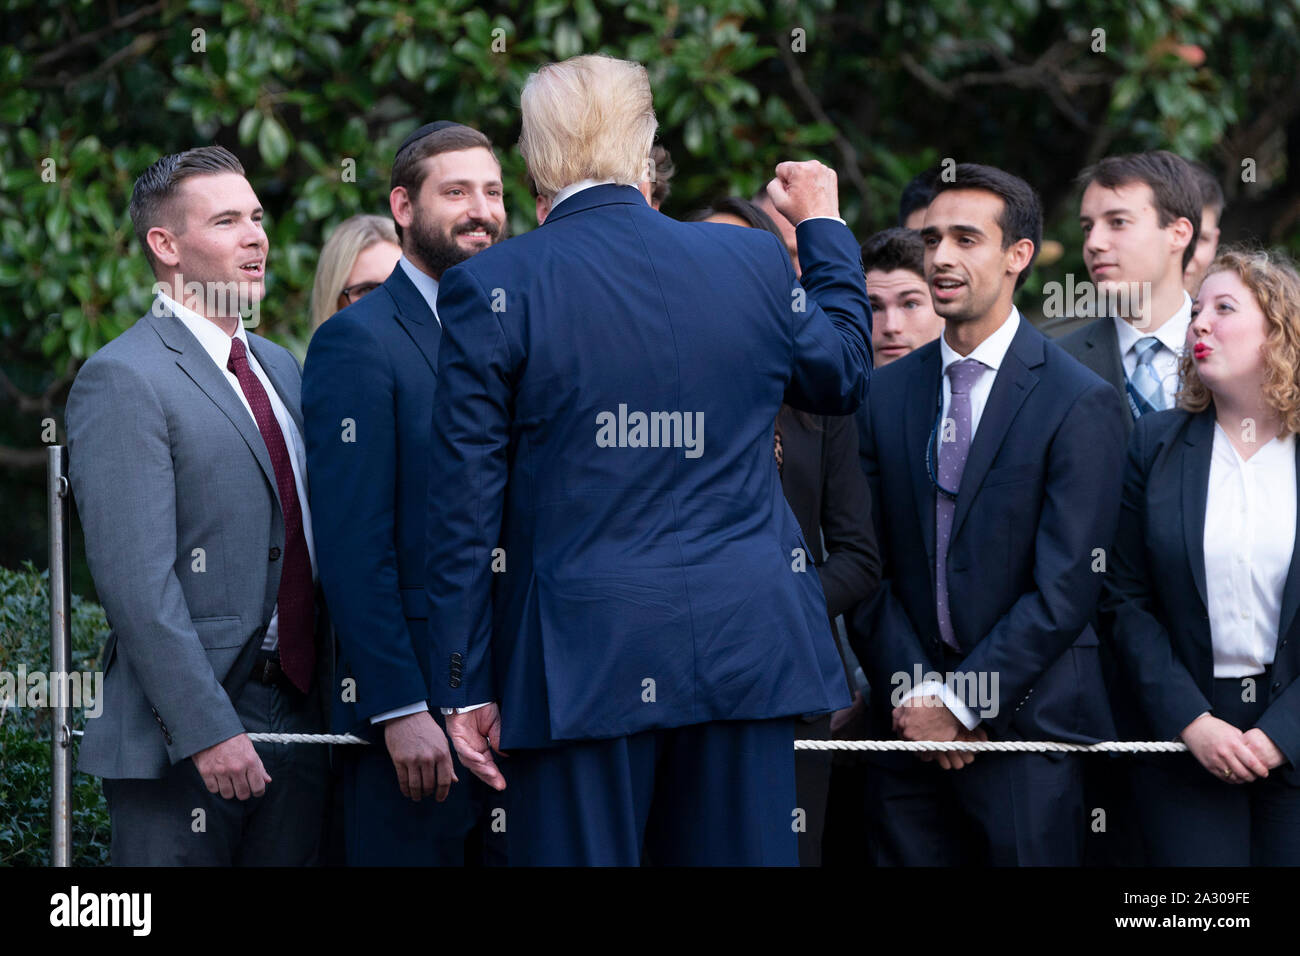 United States President Donald J. Trump greets guests as he returns to the White House in Washington, DC after signing an executive order in The Villages, Florida 'Protecting and Improving Medicare' for senior citizens on Thursday, October 3, 2019.Credit: Chris Kleponis/Pool via CNP /MediaPunch Stock Photo